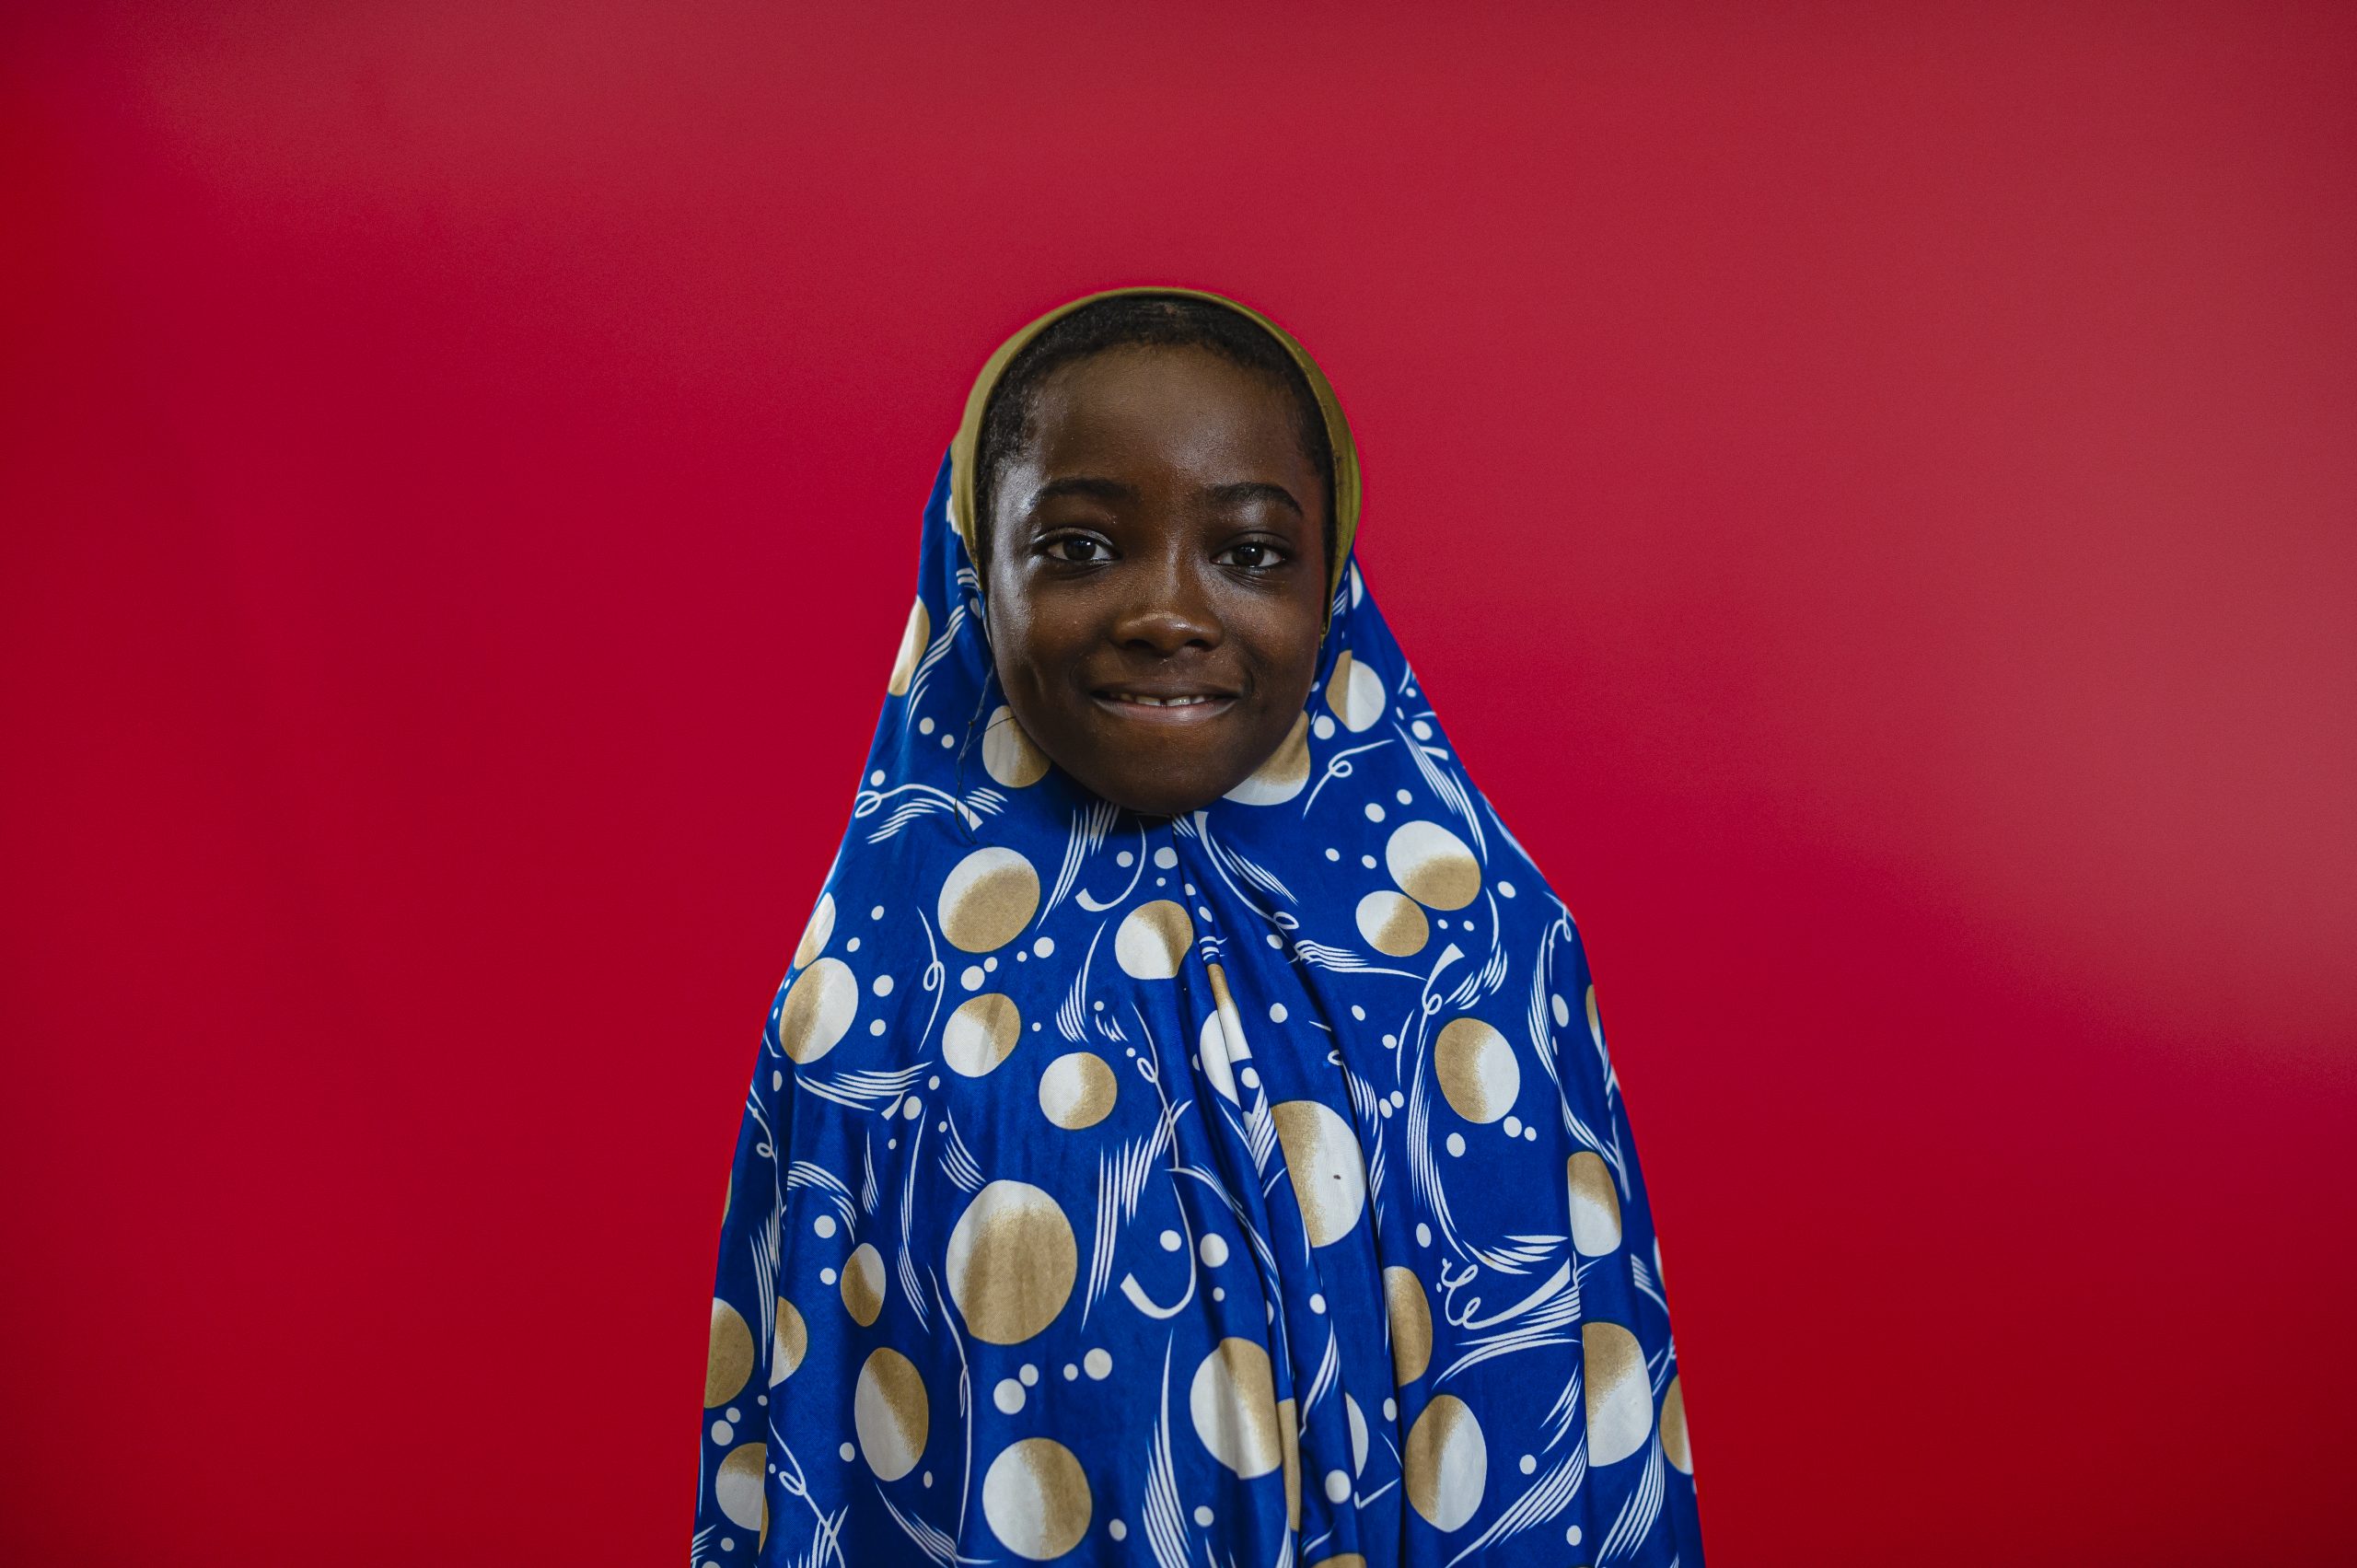 black primary school girl in blue hijab decorated with planets and stars. She is looking at the camera stood against a red background